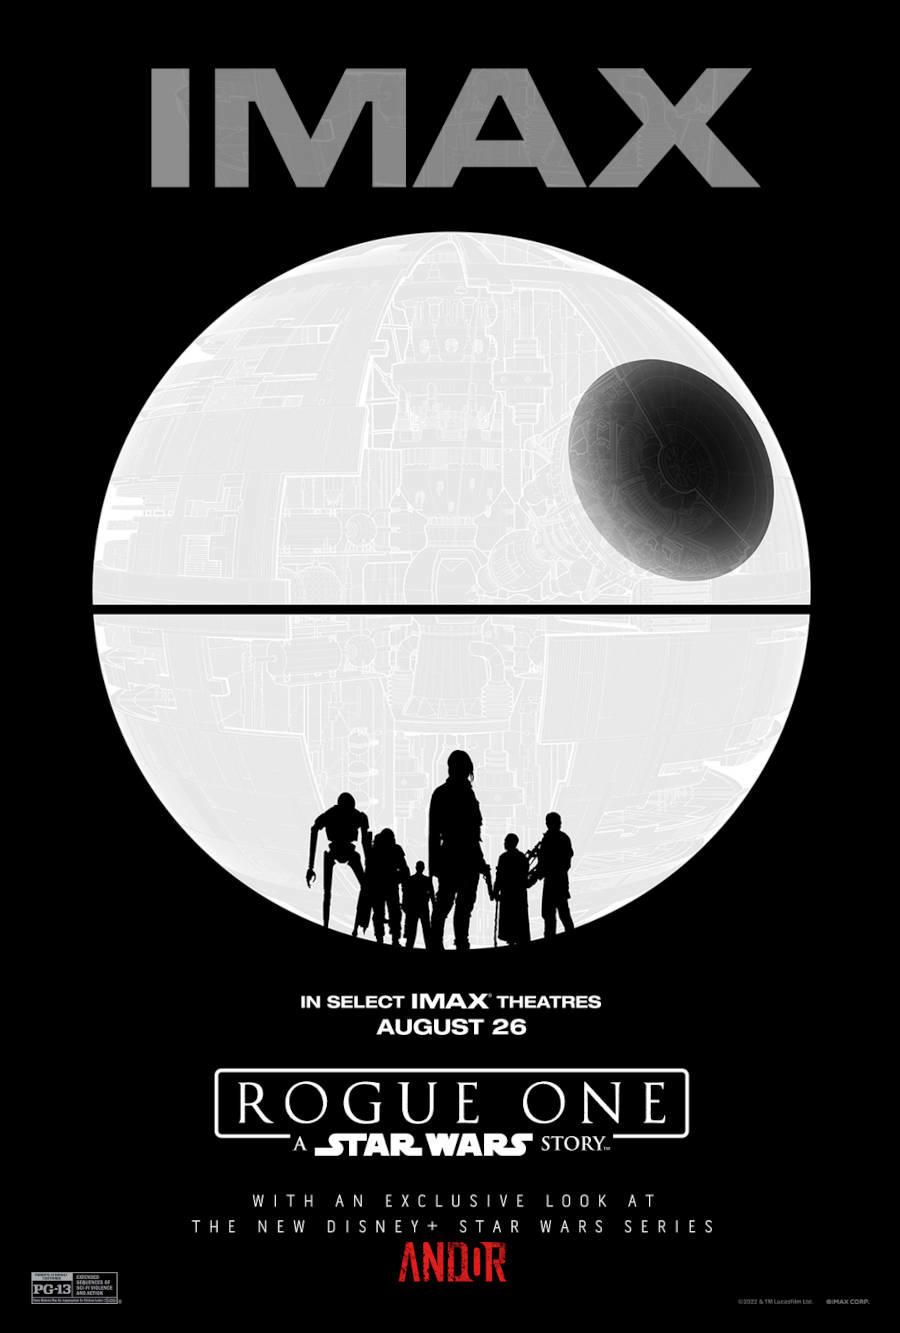 star-wars-rogue-one-getting-imax-re-release-with-new-andor-footage